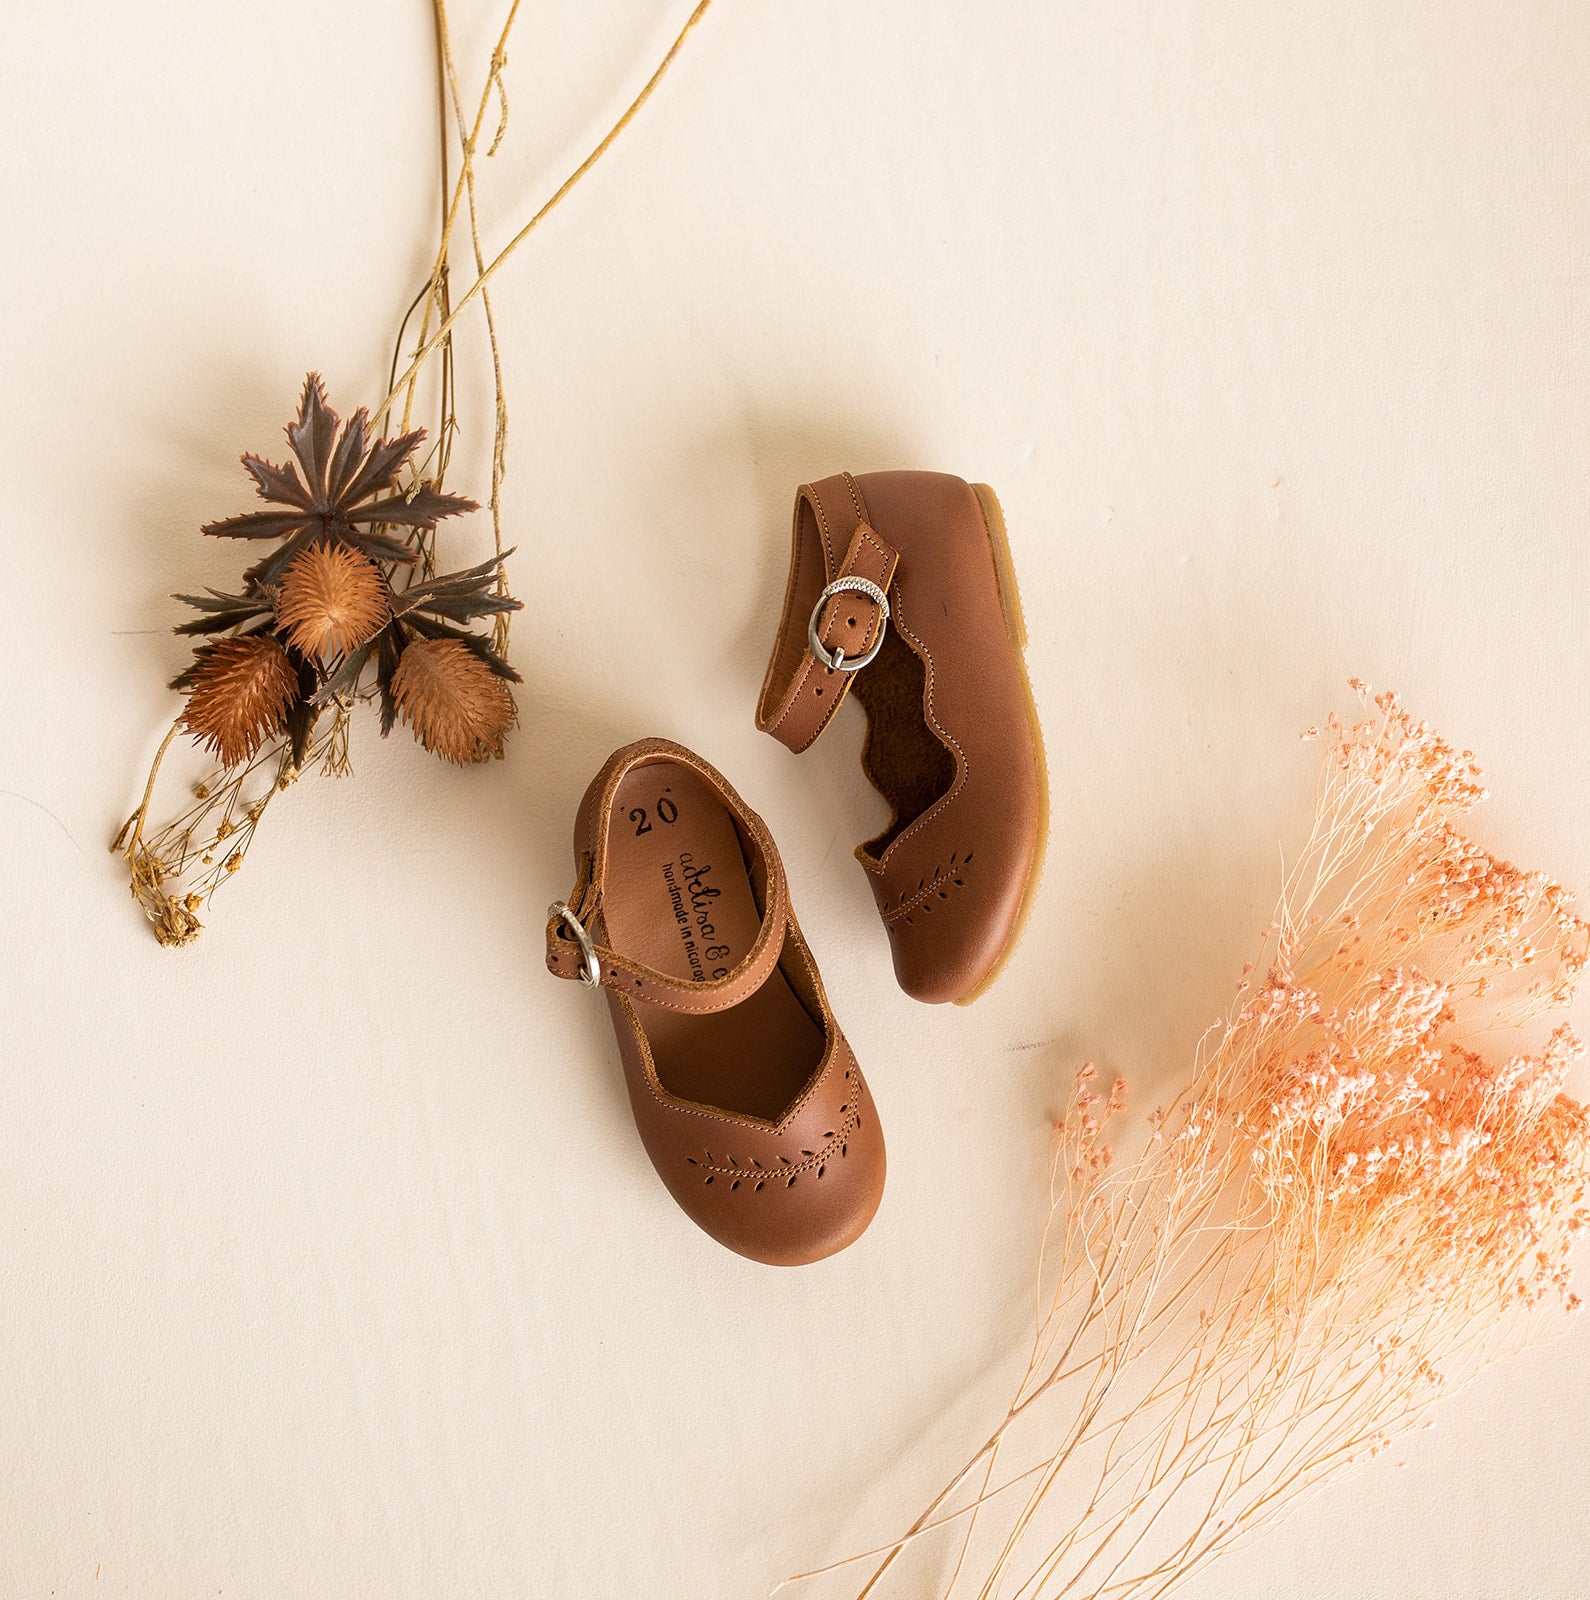 Cosecha Children's Leather Mary Janes